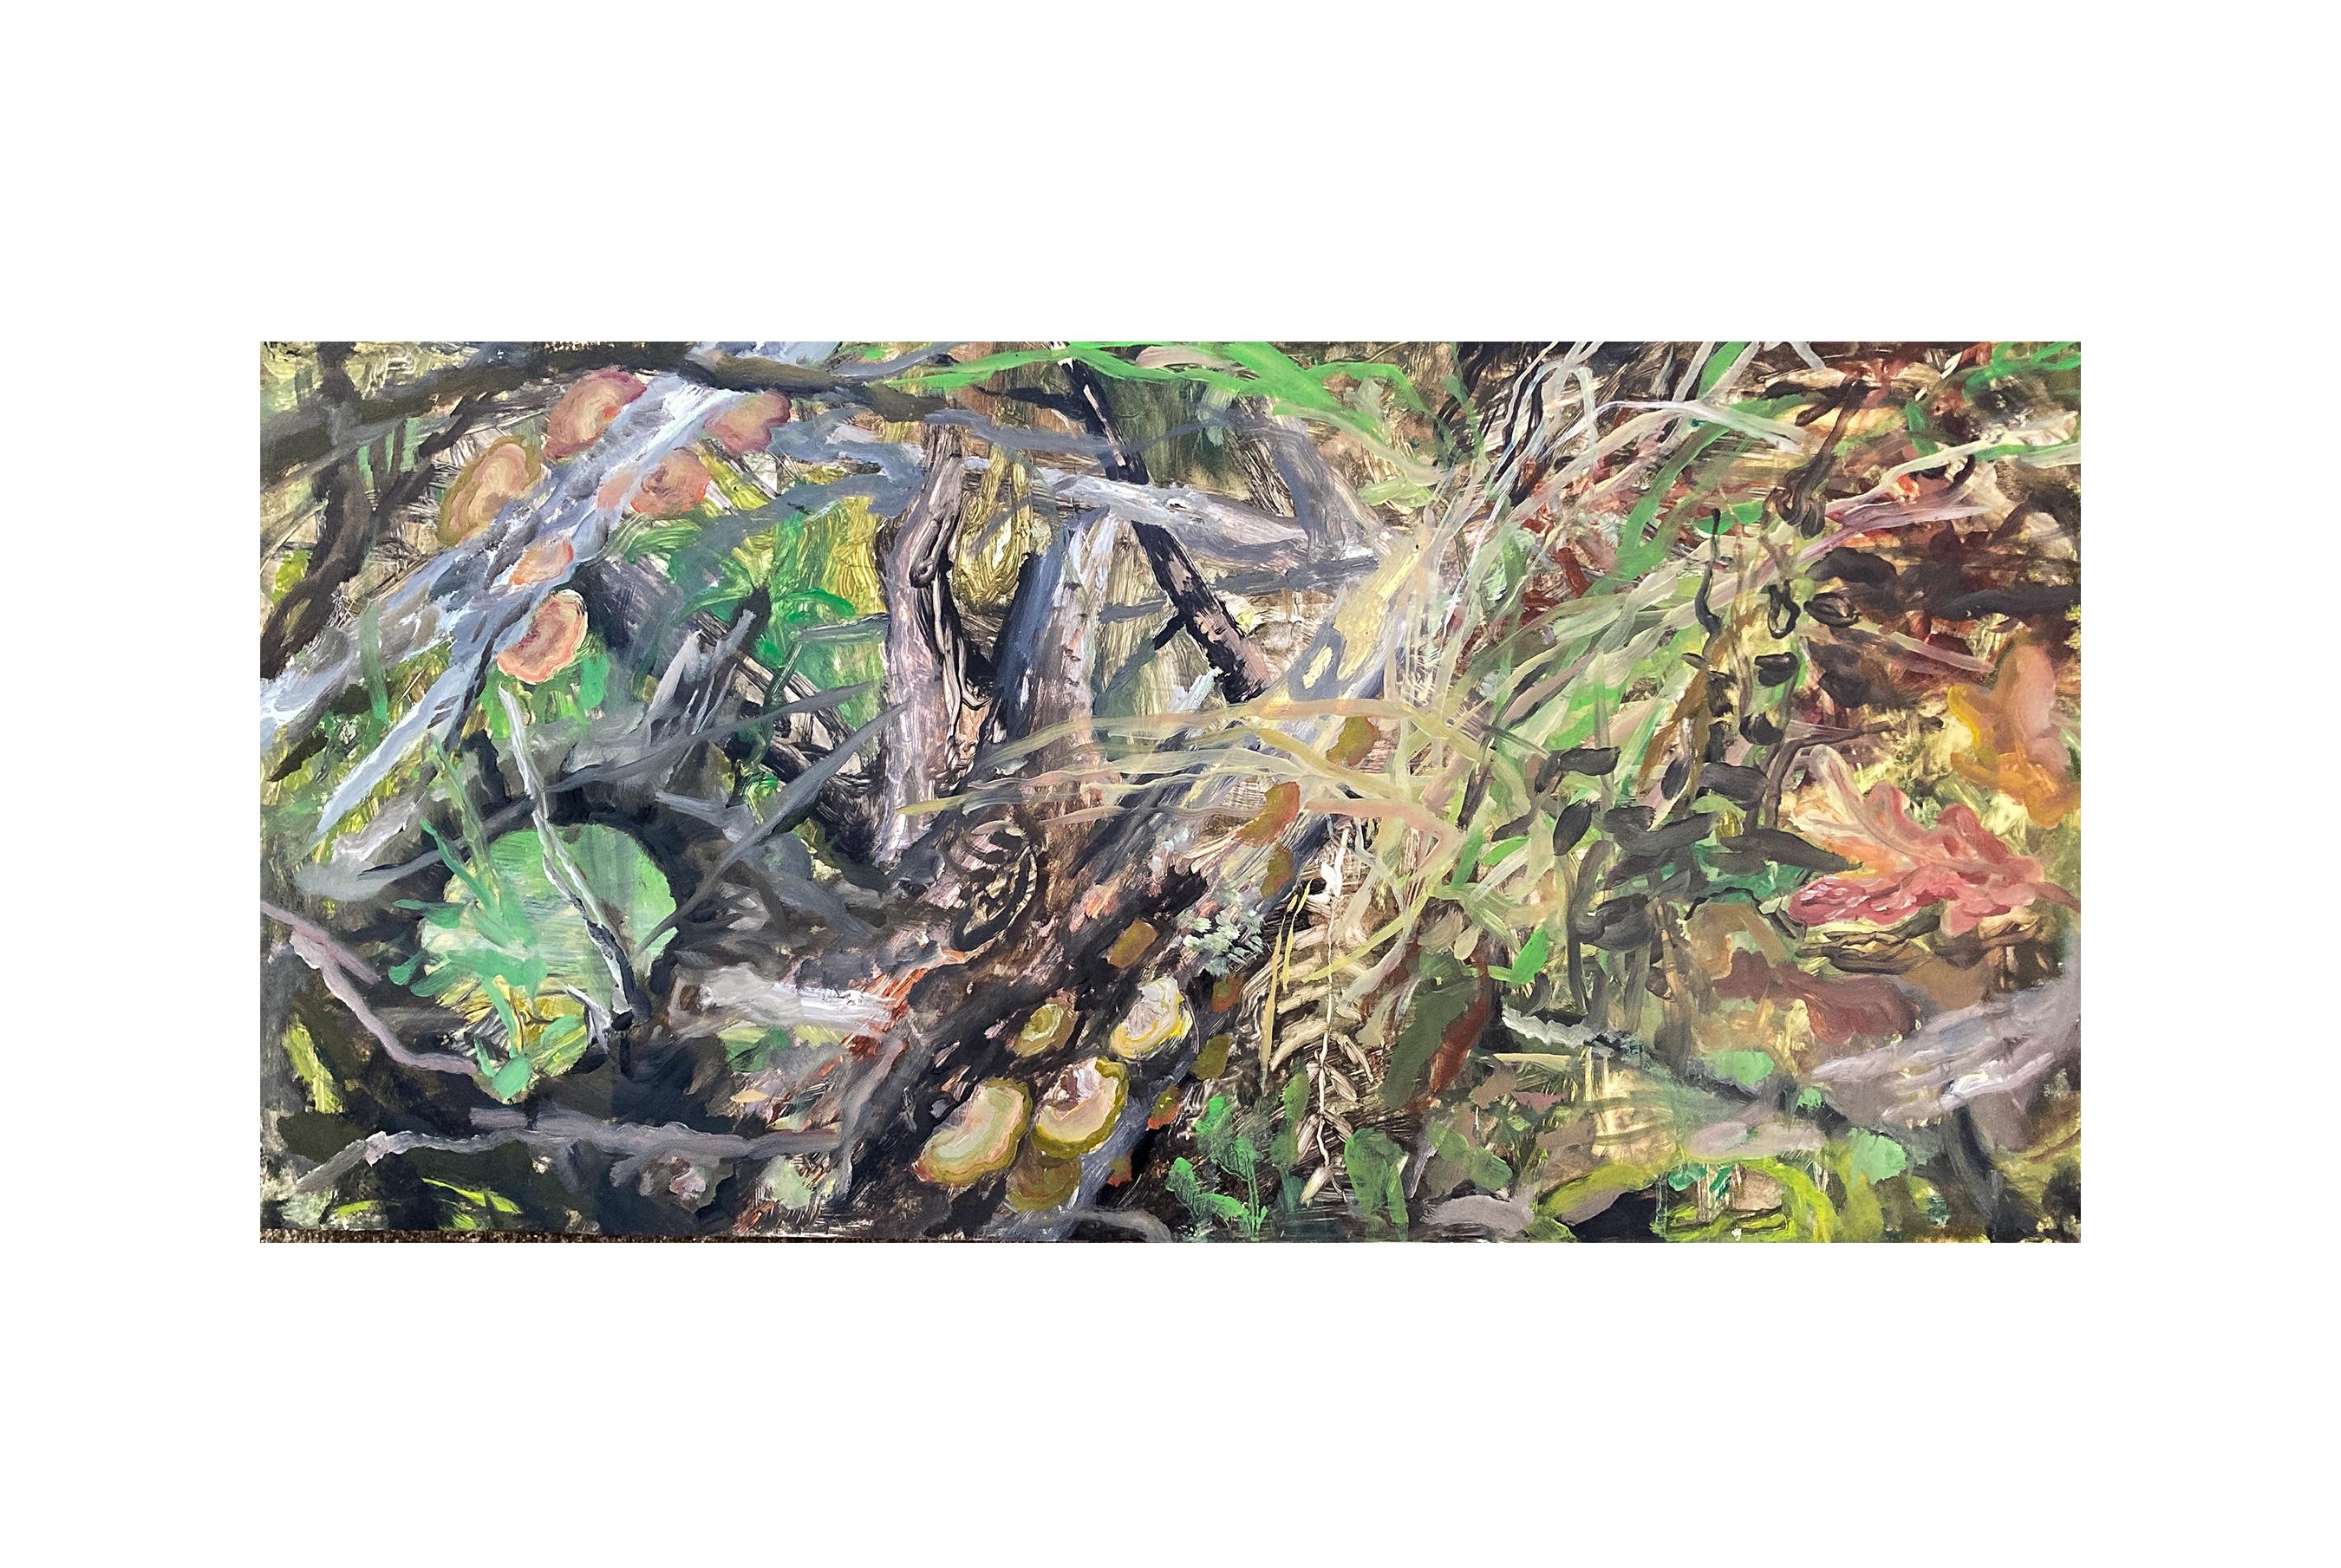 FOREST FLOOR INHABITANTS: OCTOBER - Oil on Yupo Panel Painting of Plant Life